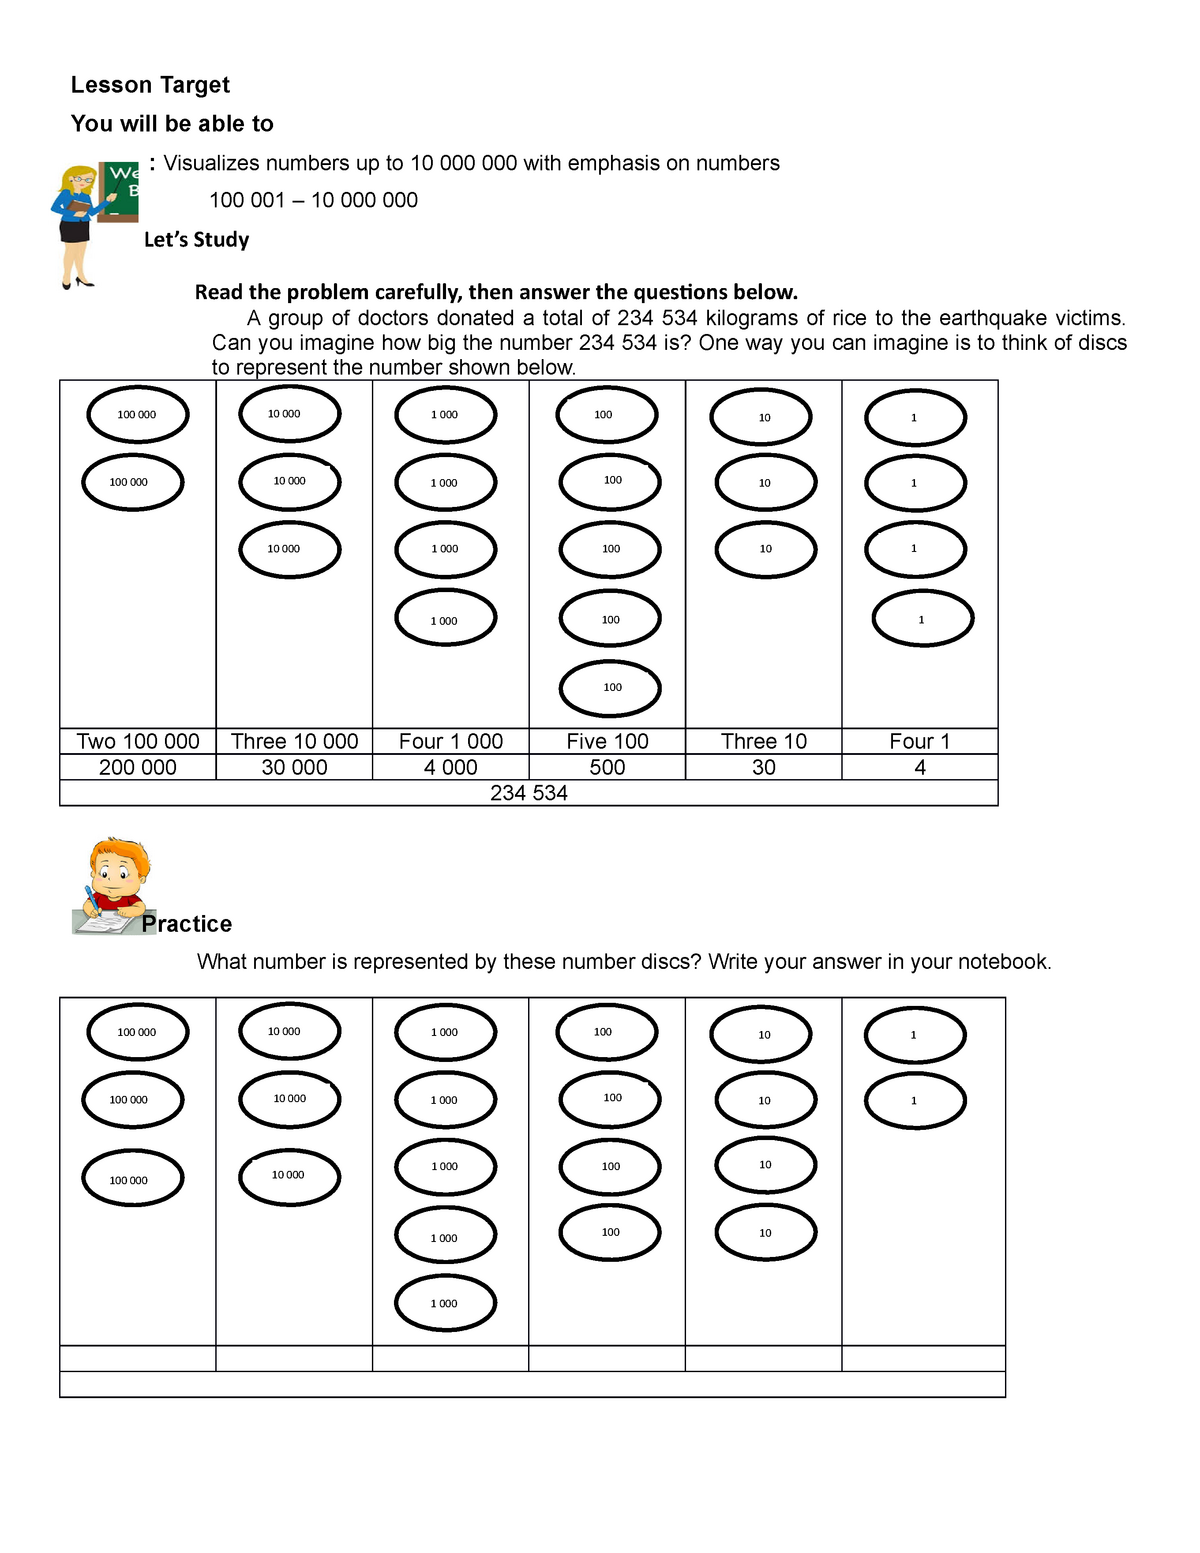 Worksheet 1 Teacher Cora Lesson Target You Will Be Able To Let s Study Read The Problem